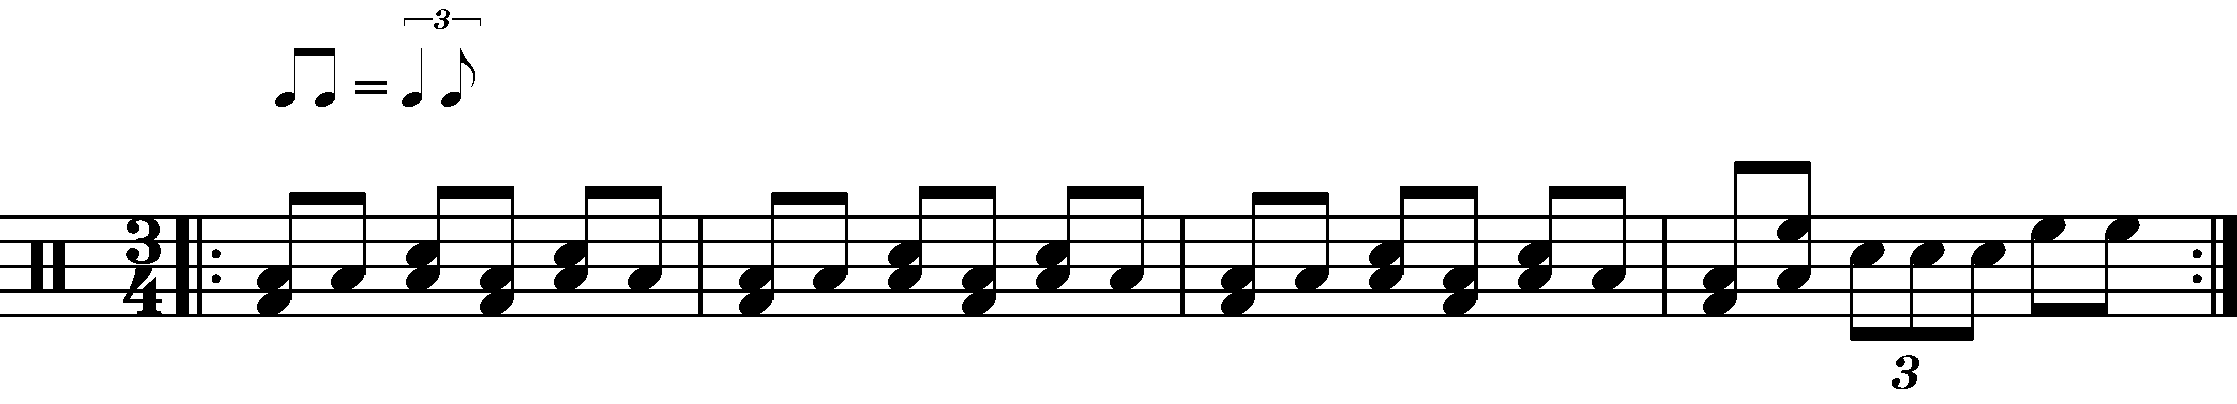 A four bar phrase in swing time.